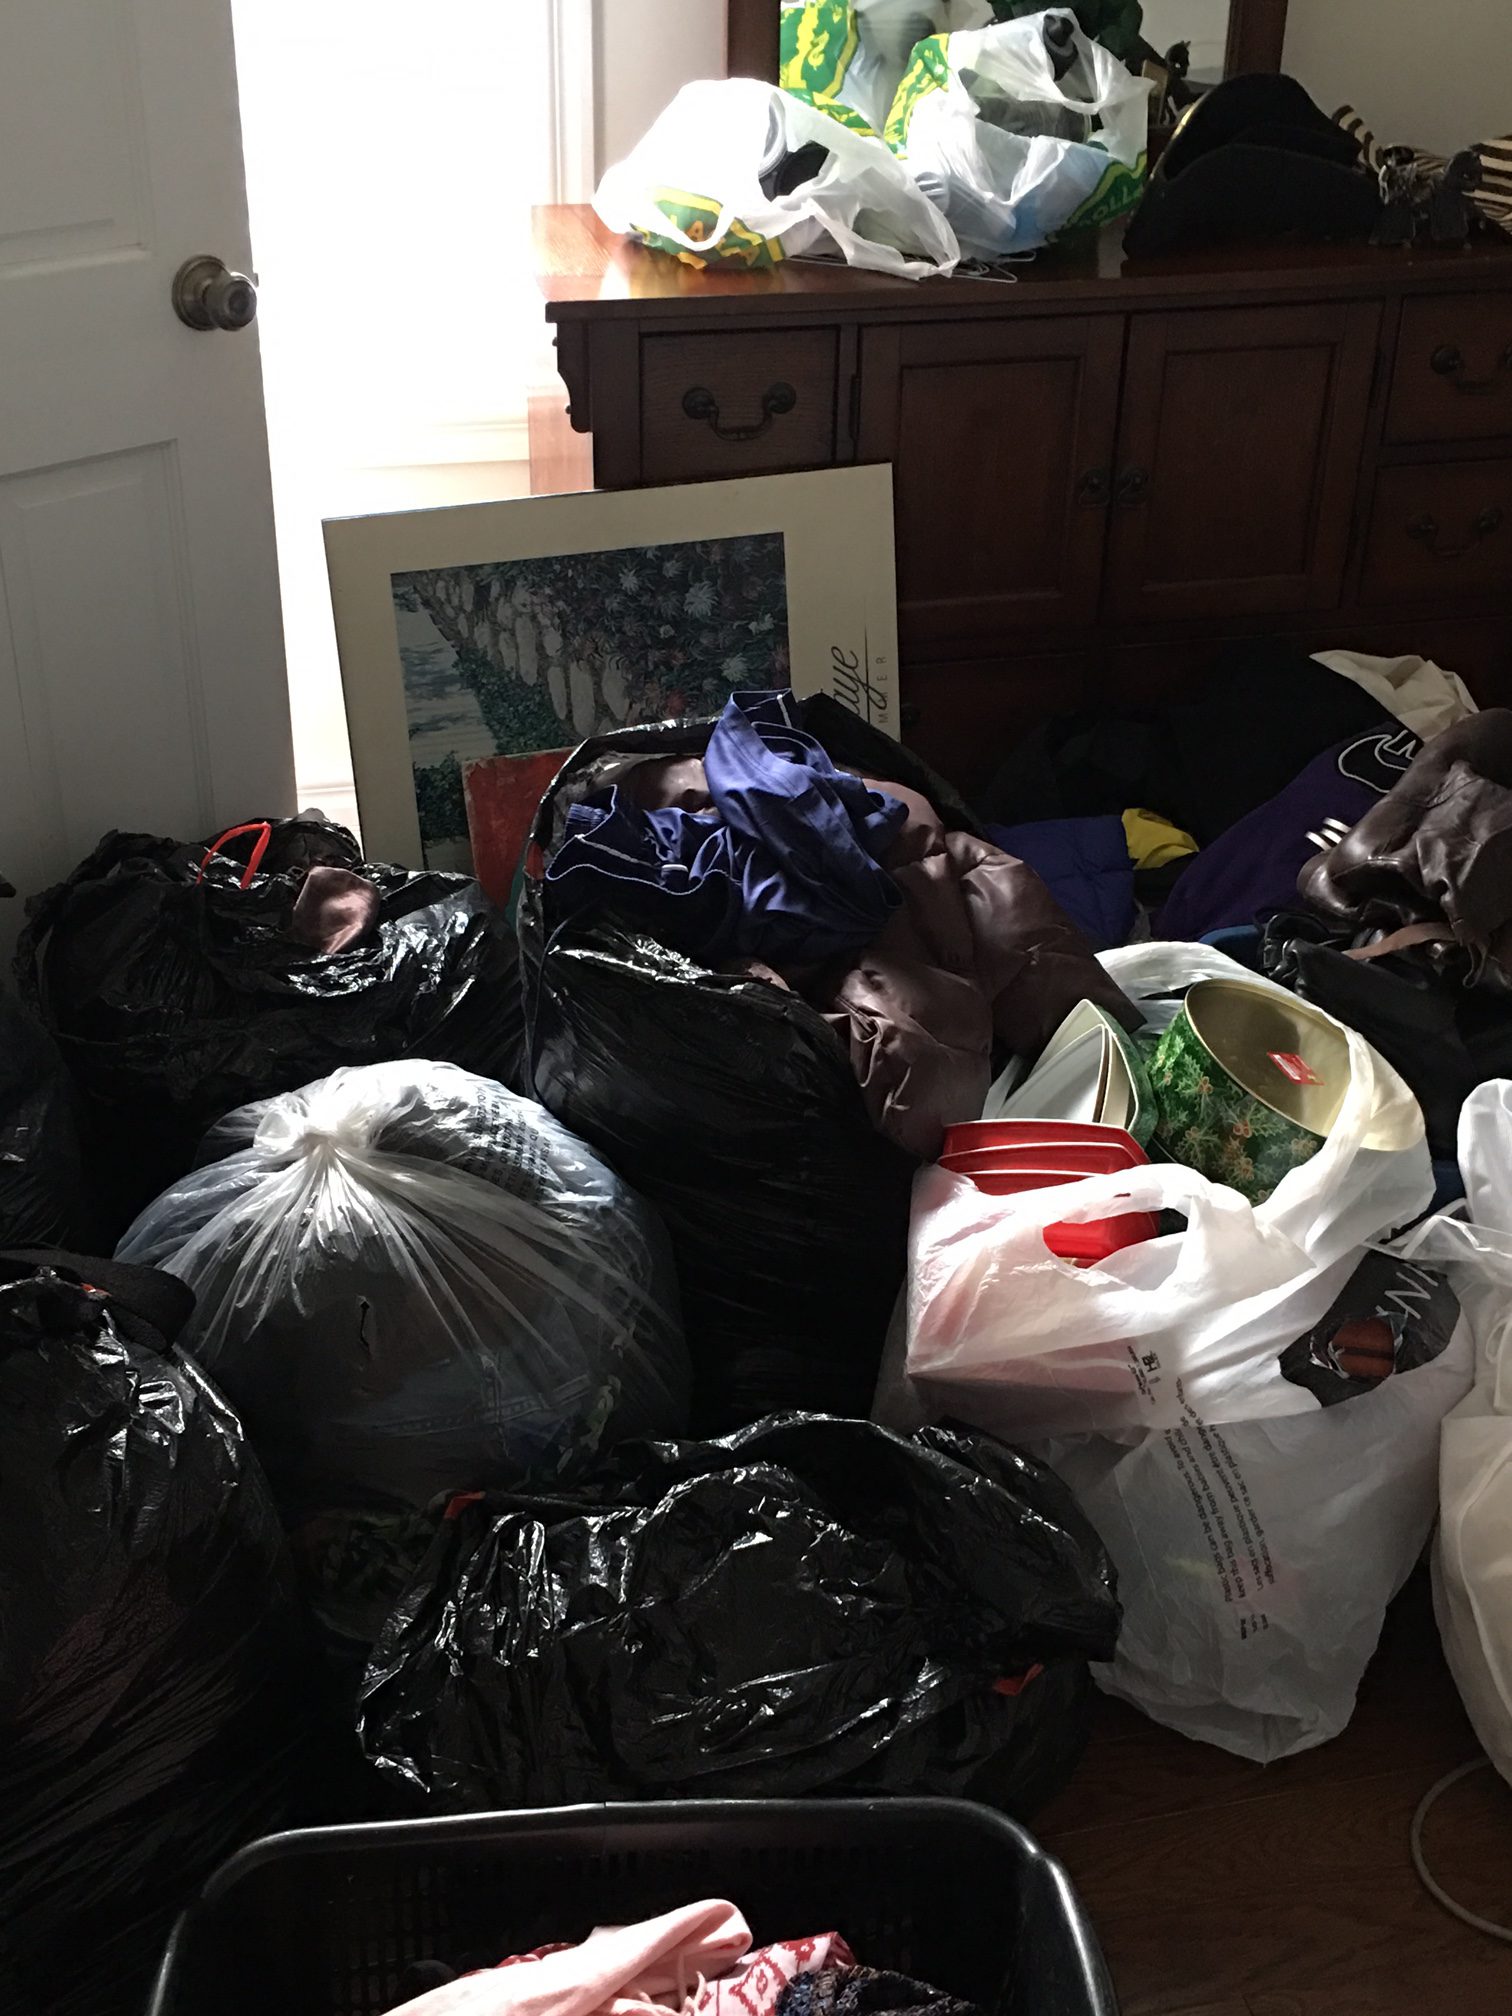 Clearing the Clutter to Make Space for God